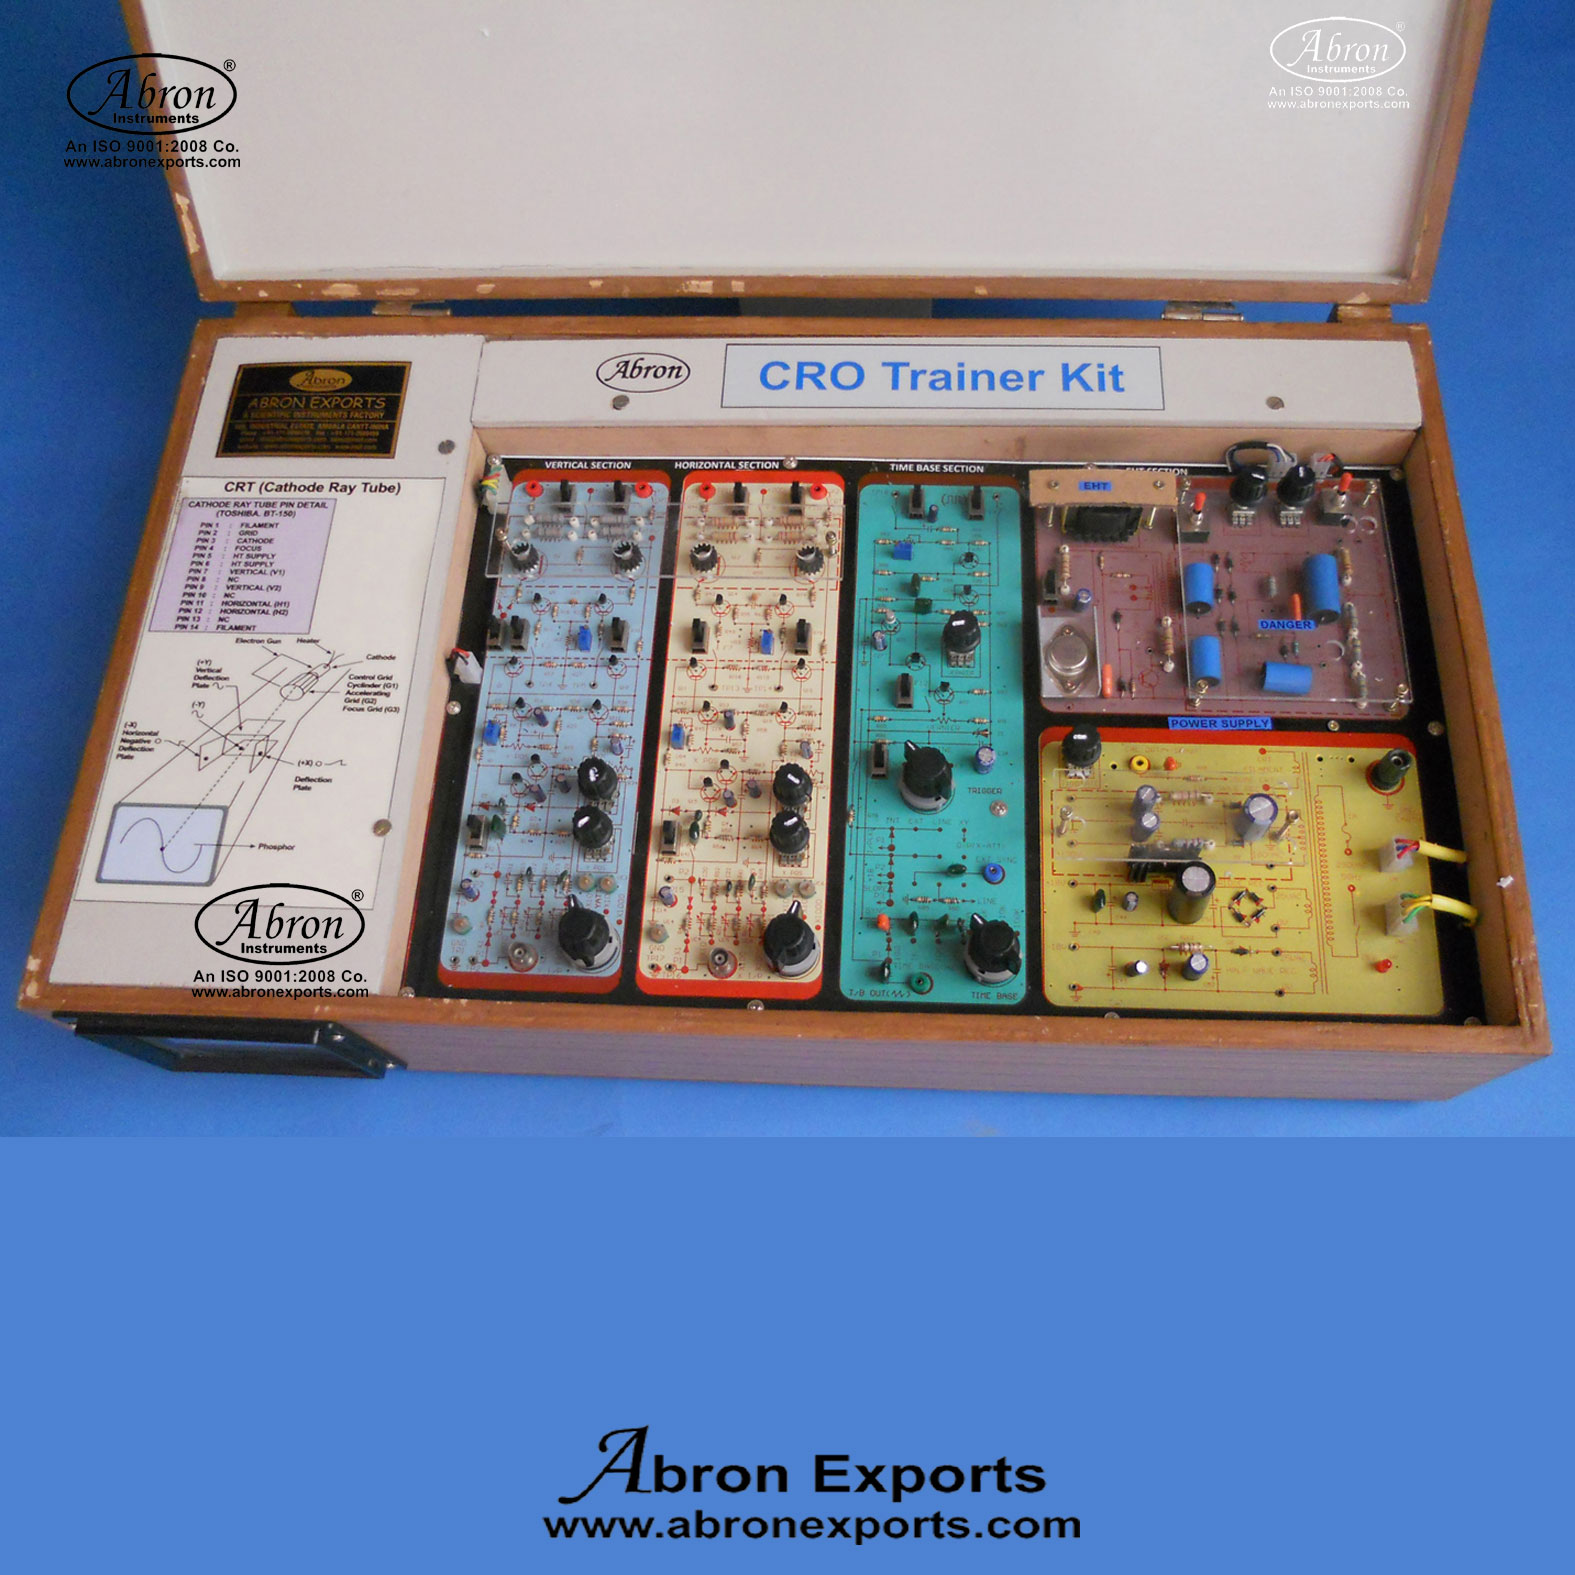 Cro demonstration trainer kit to study abron AE-1426D